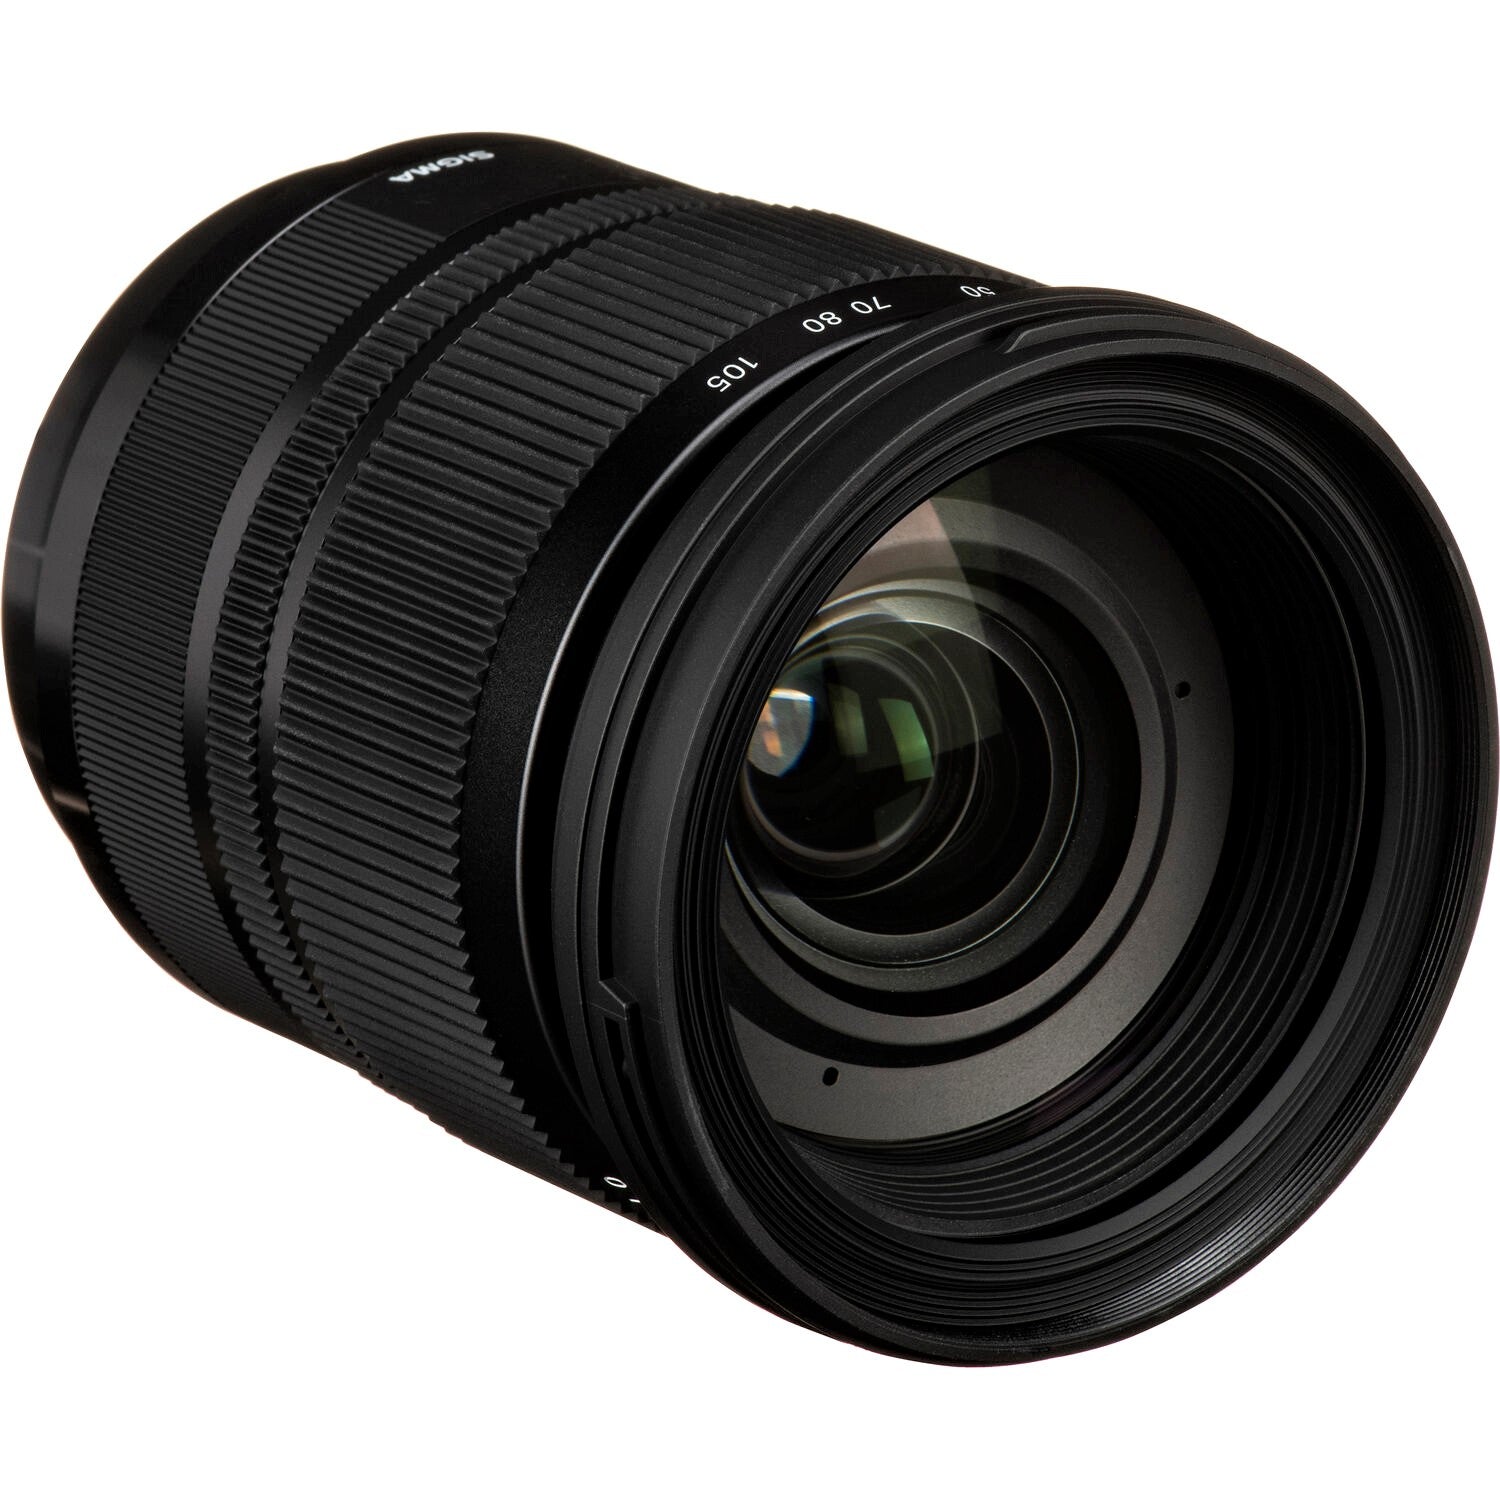 Sigma 24-105mm F4.0 DG OS HSM Art Lens (Canon EF) in a Front-Side View